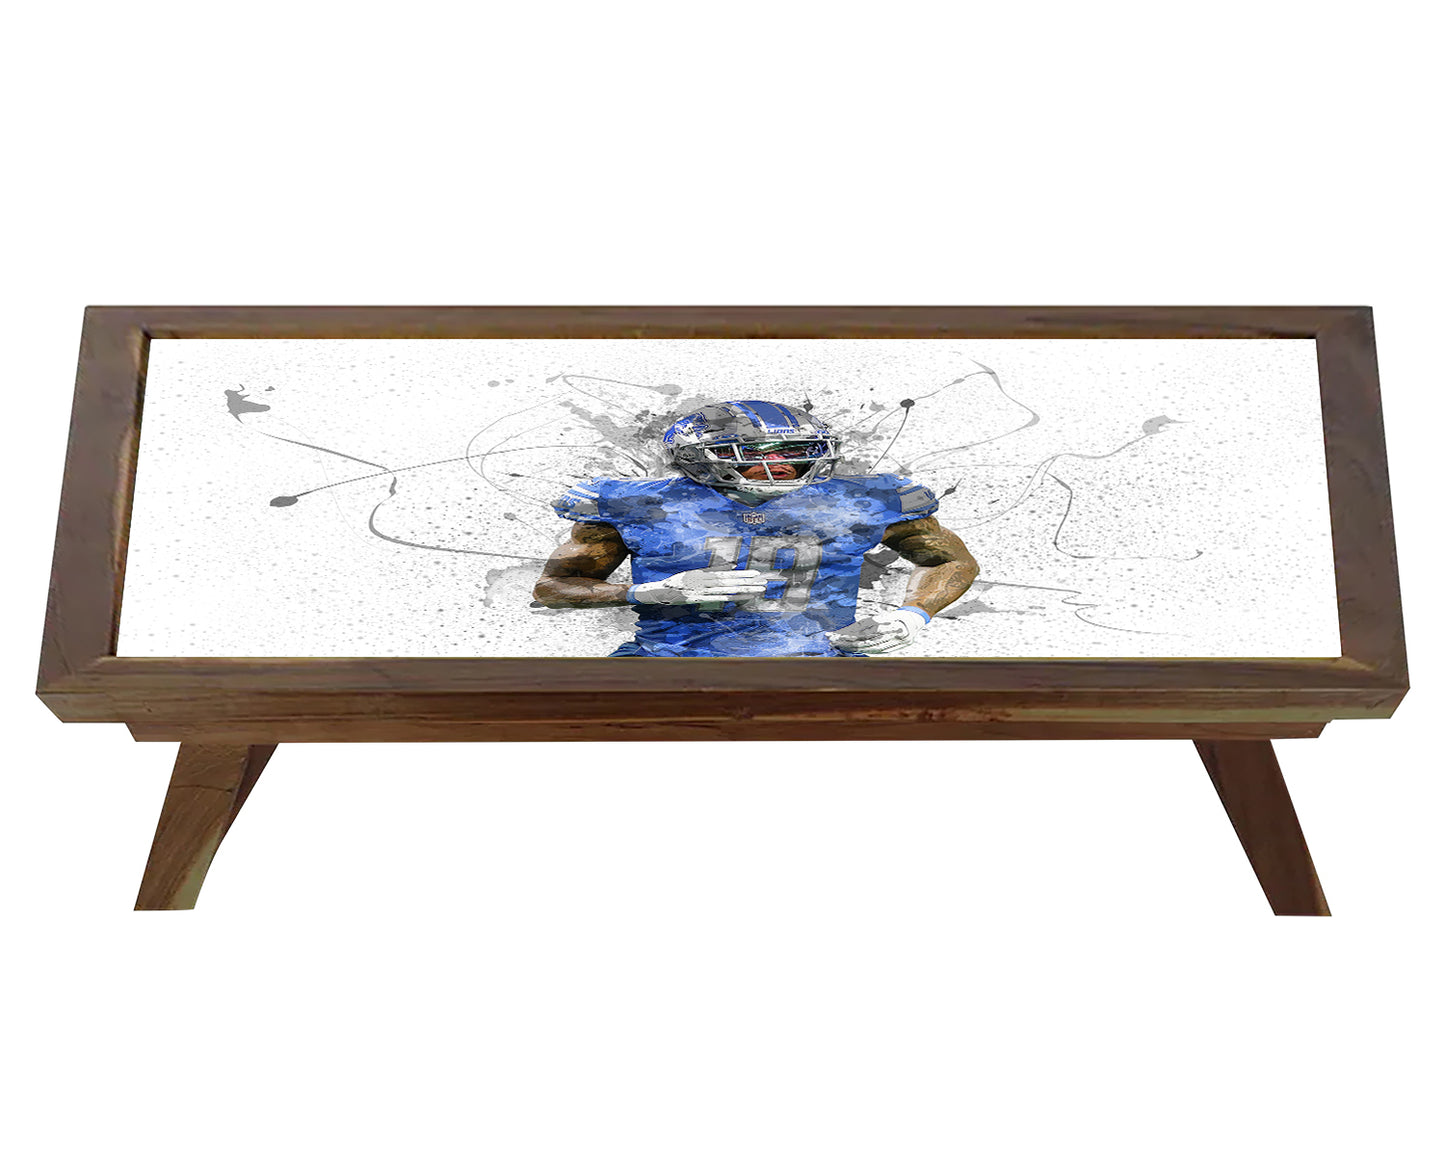 Kenny Golladay Splash Effect Coffee and Laptop Table 